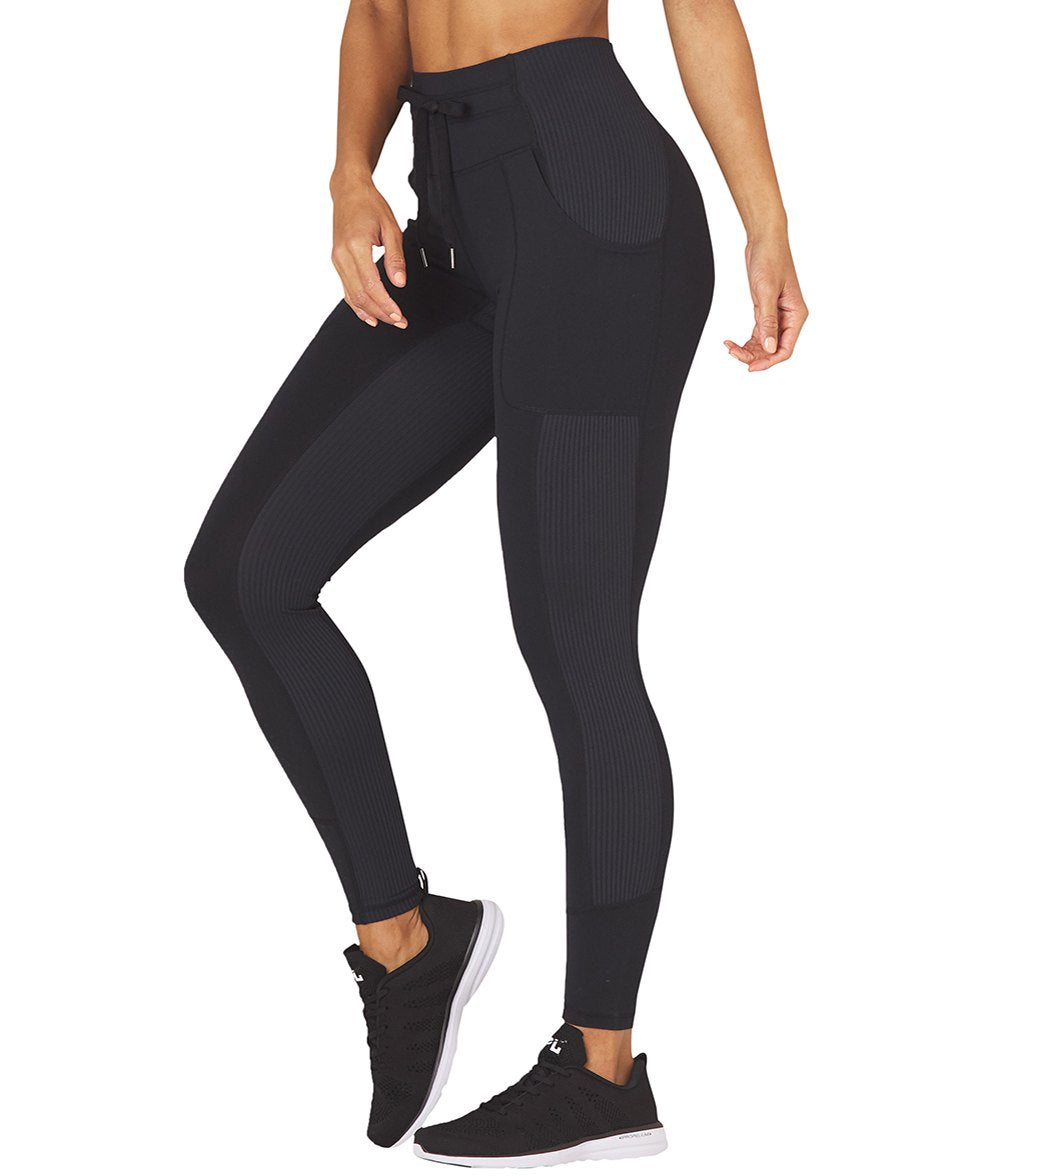 Glyder Street Yoga Leggings at YogaOutlet.com - Free Shipping